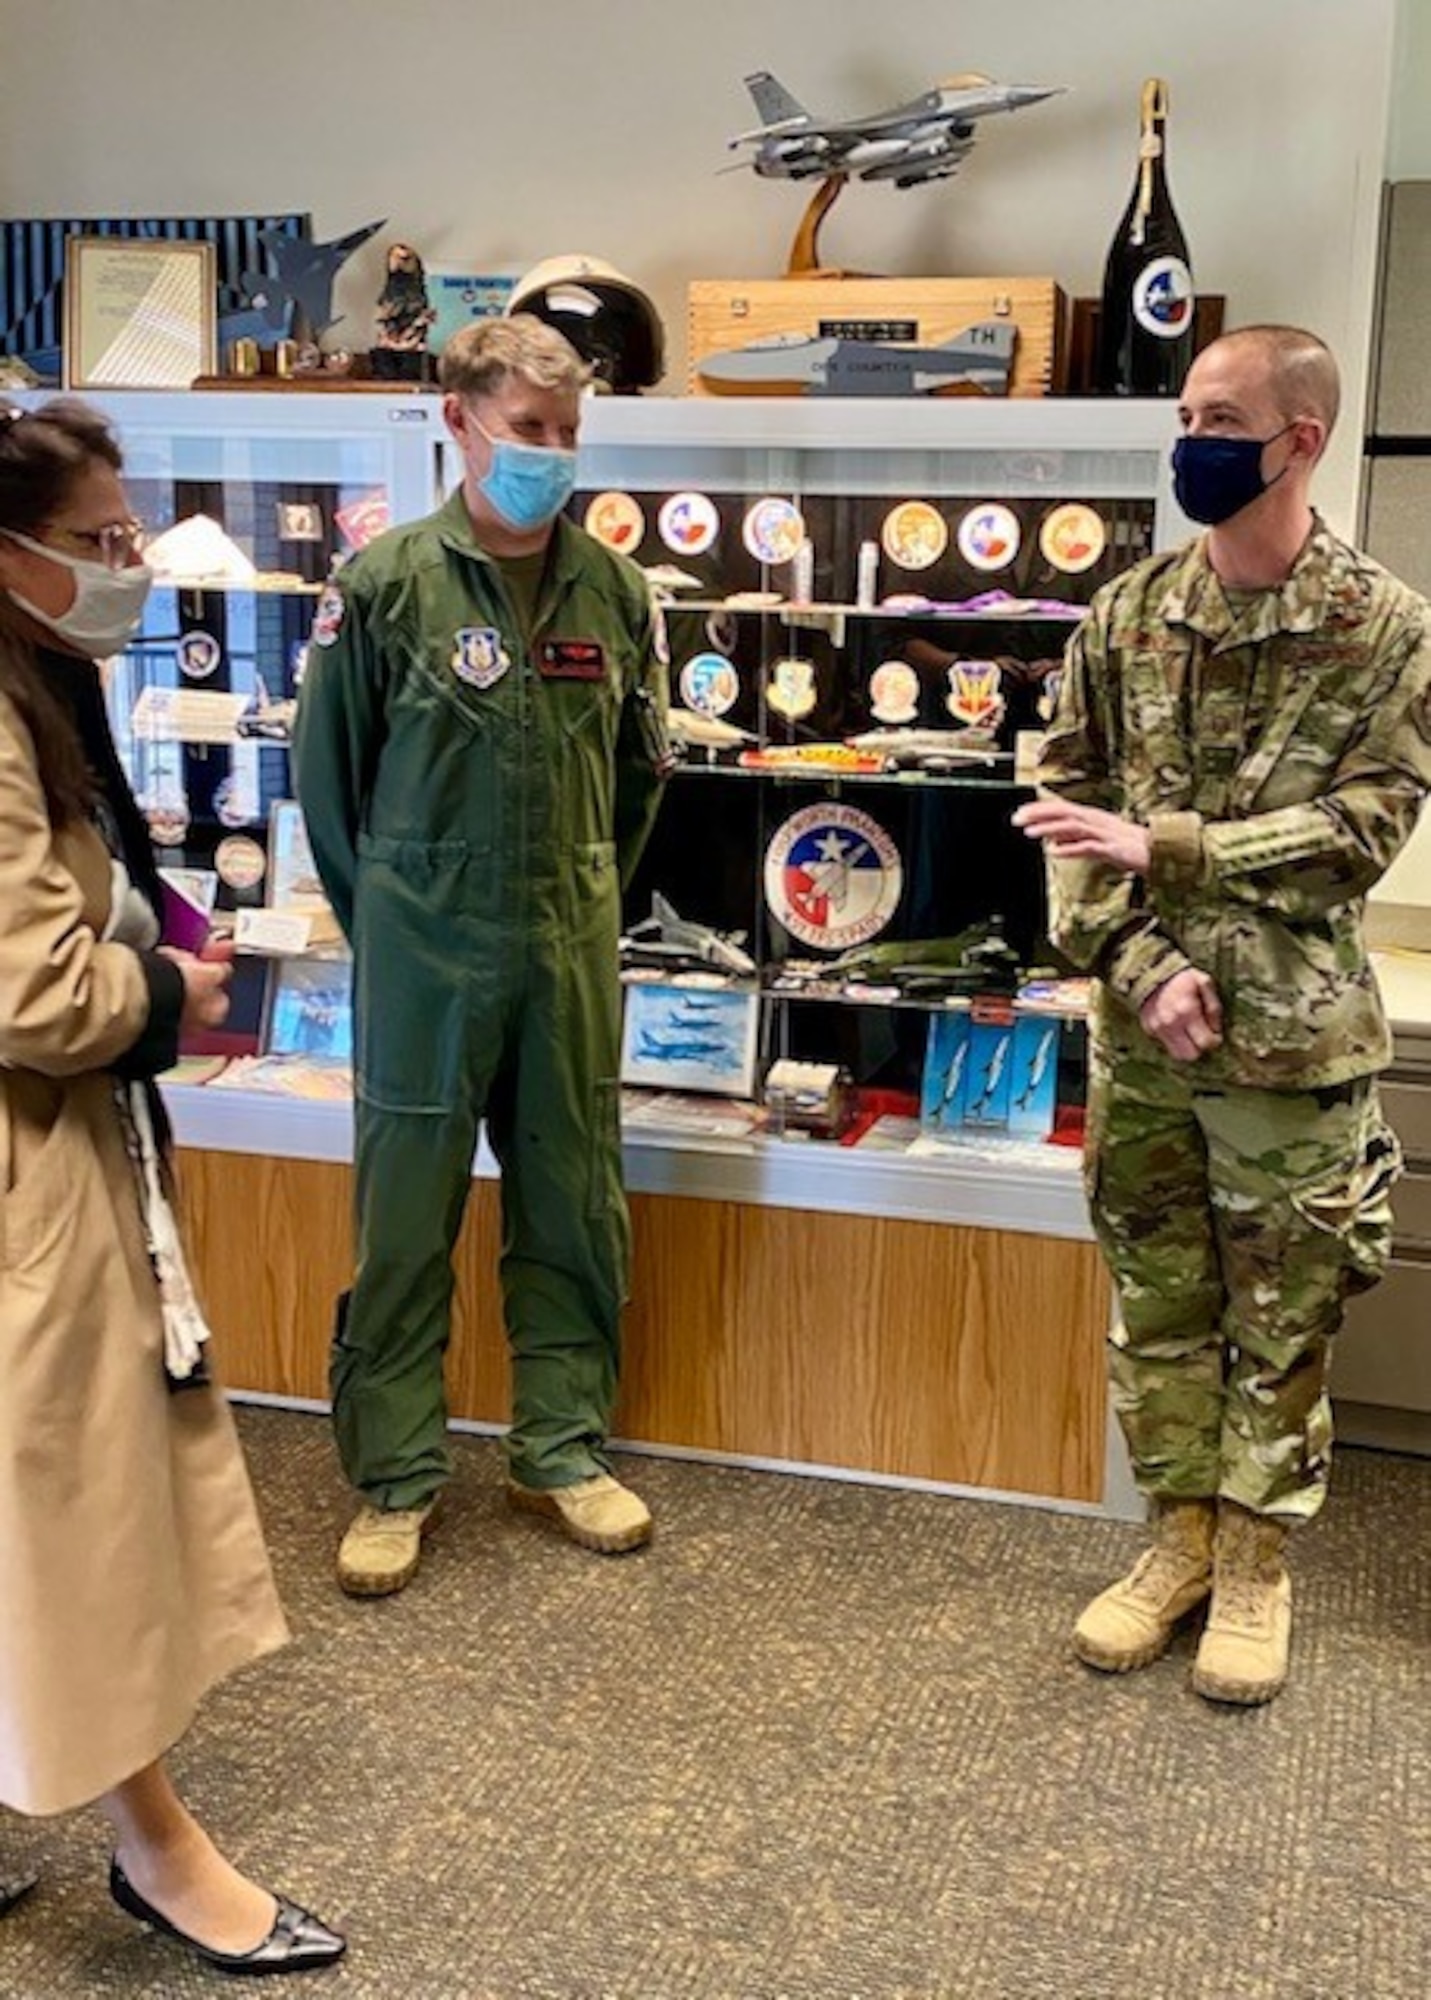 Ms. Dawn Androsky, left, Air Force Reserve Command director of staff, speaks with Master Sgt. Rudy Panacci, right, the acting 301st Fighter Wing Aircrew Flight Equipment superintendent, after she coins him for his contributions to the wing.